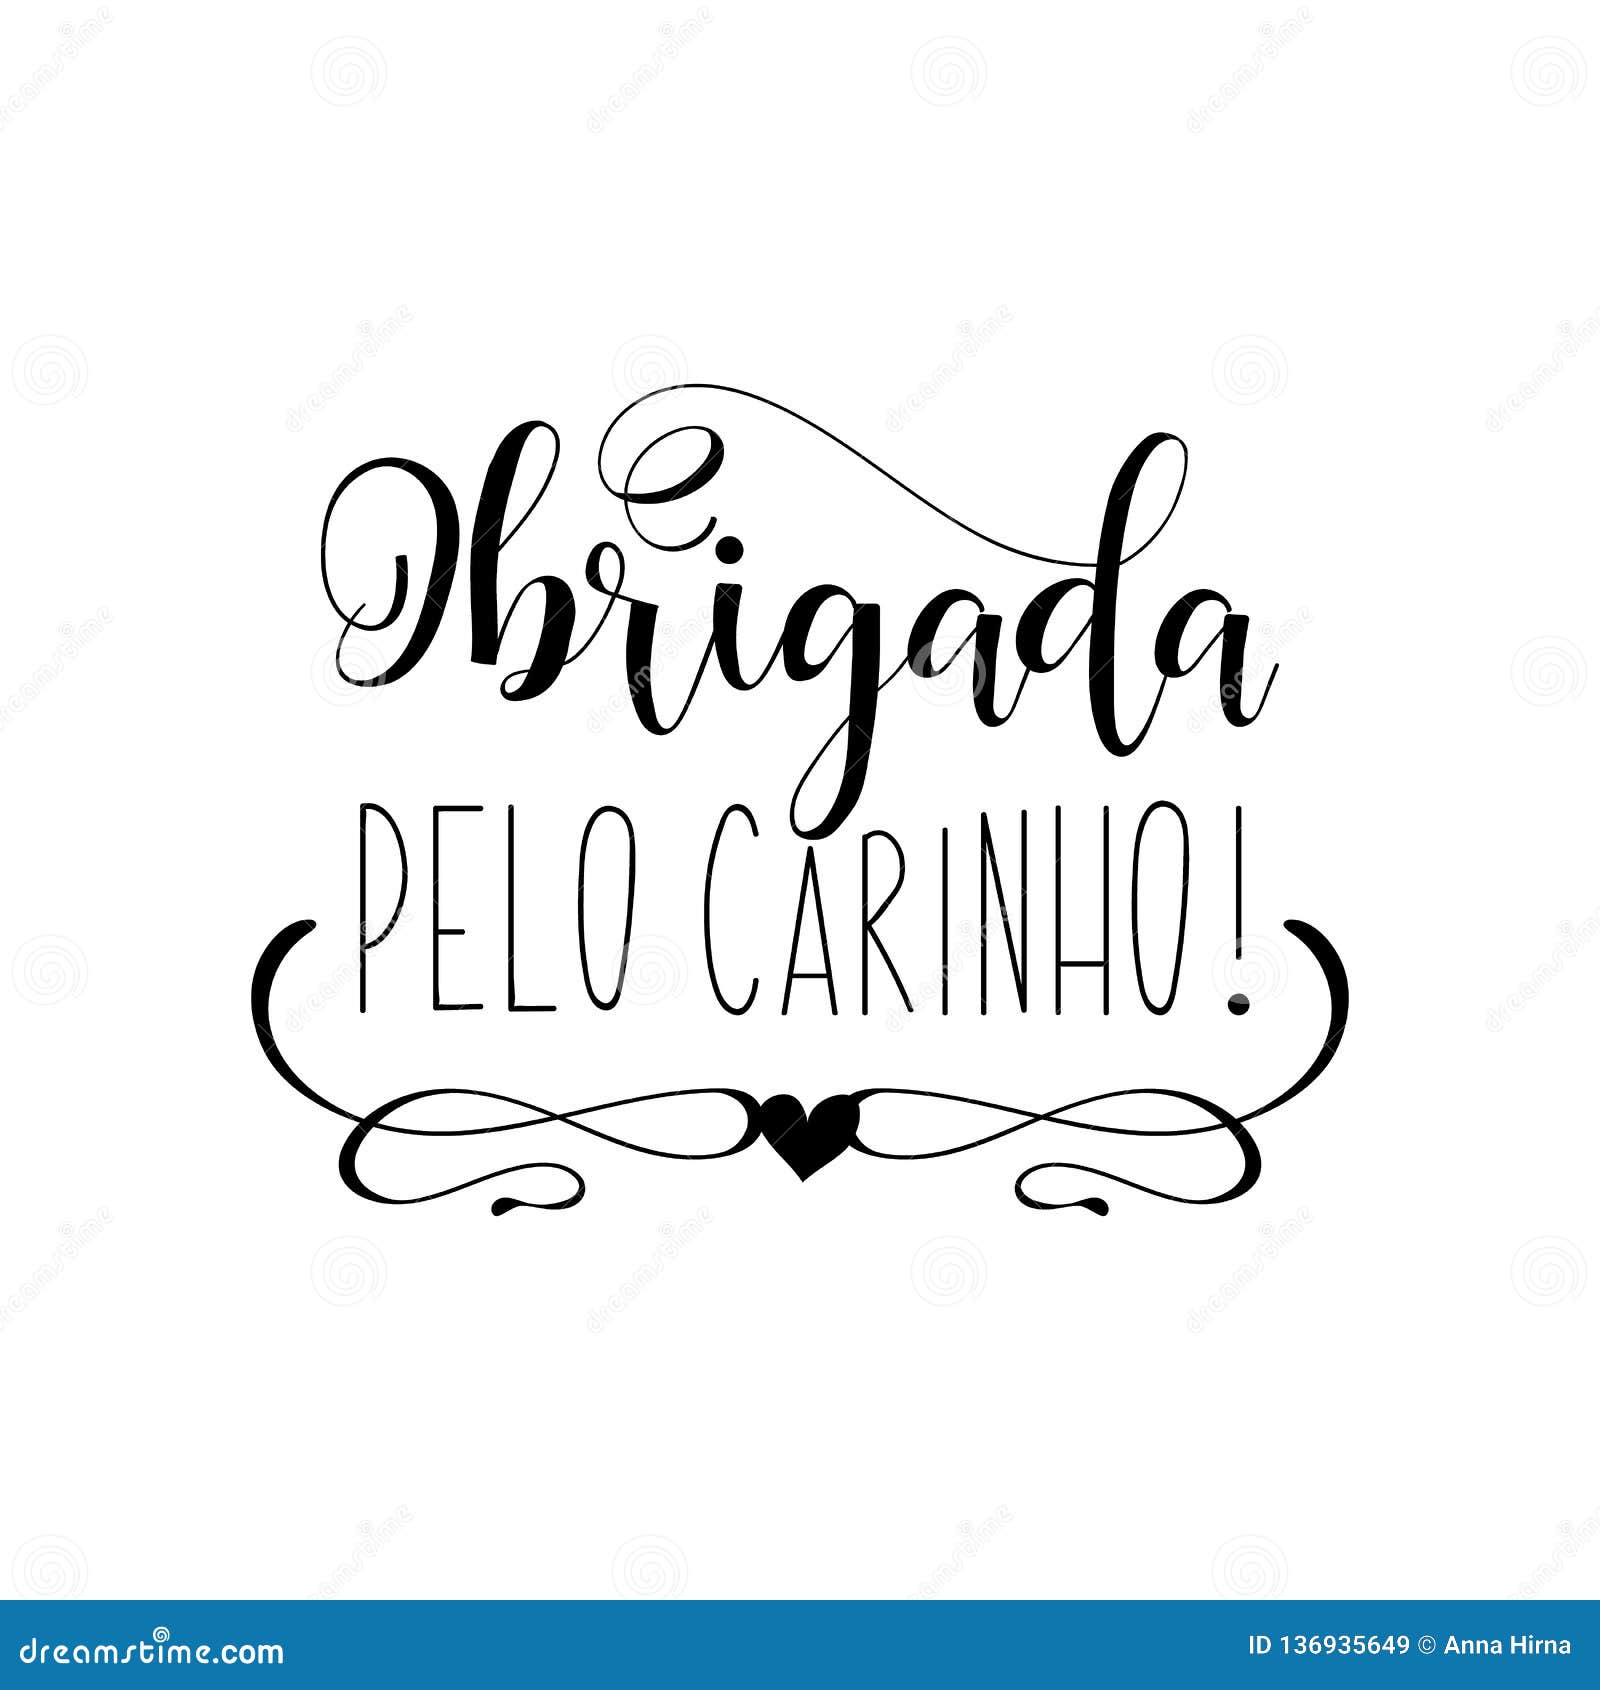 thank you lettering card. translation from portuguese - thank you for the affection. obrigada pelo carinho